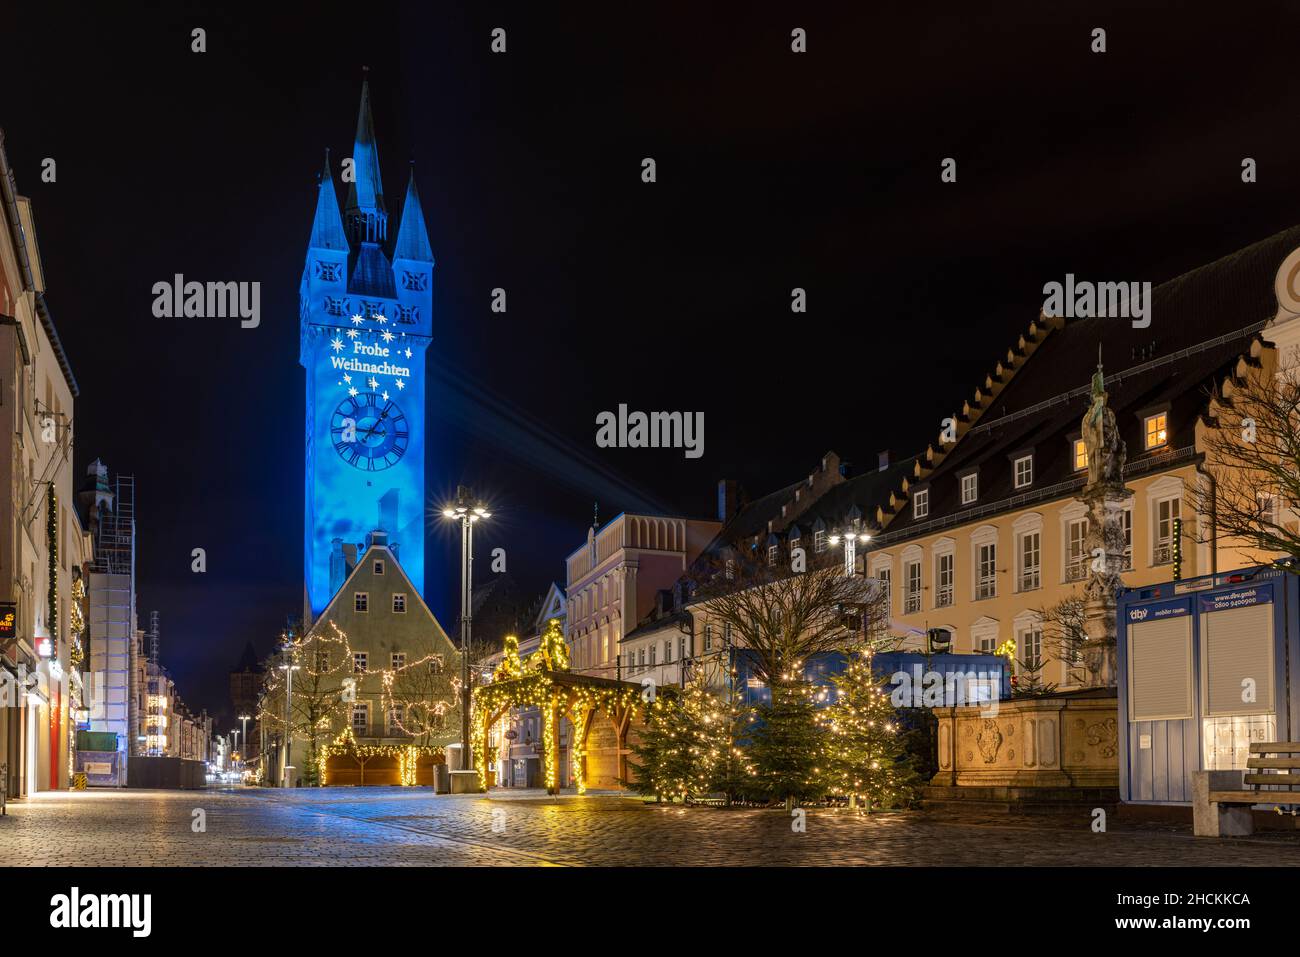 Historical buildings illuminated for holiday season in Straubing, Germany Stock Photo